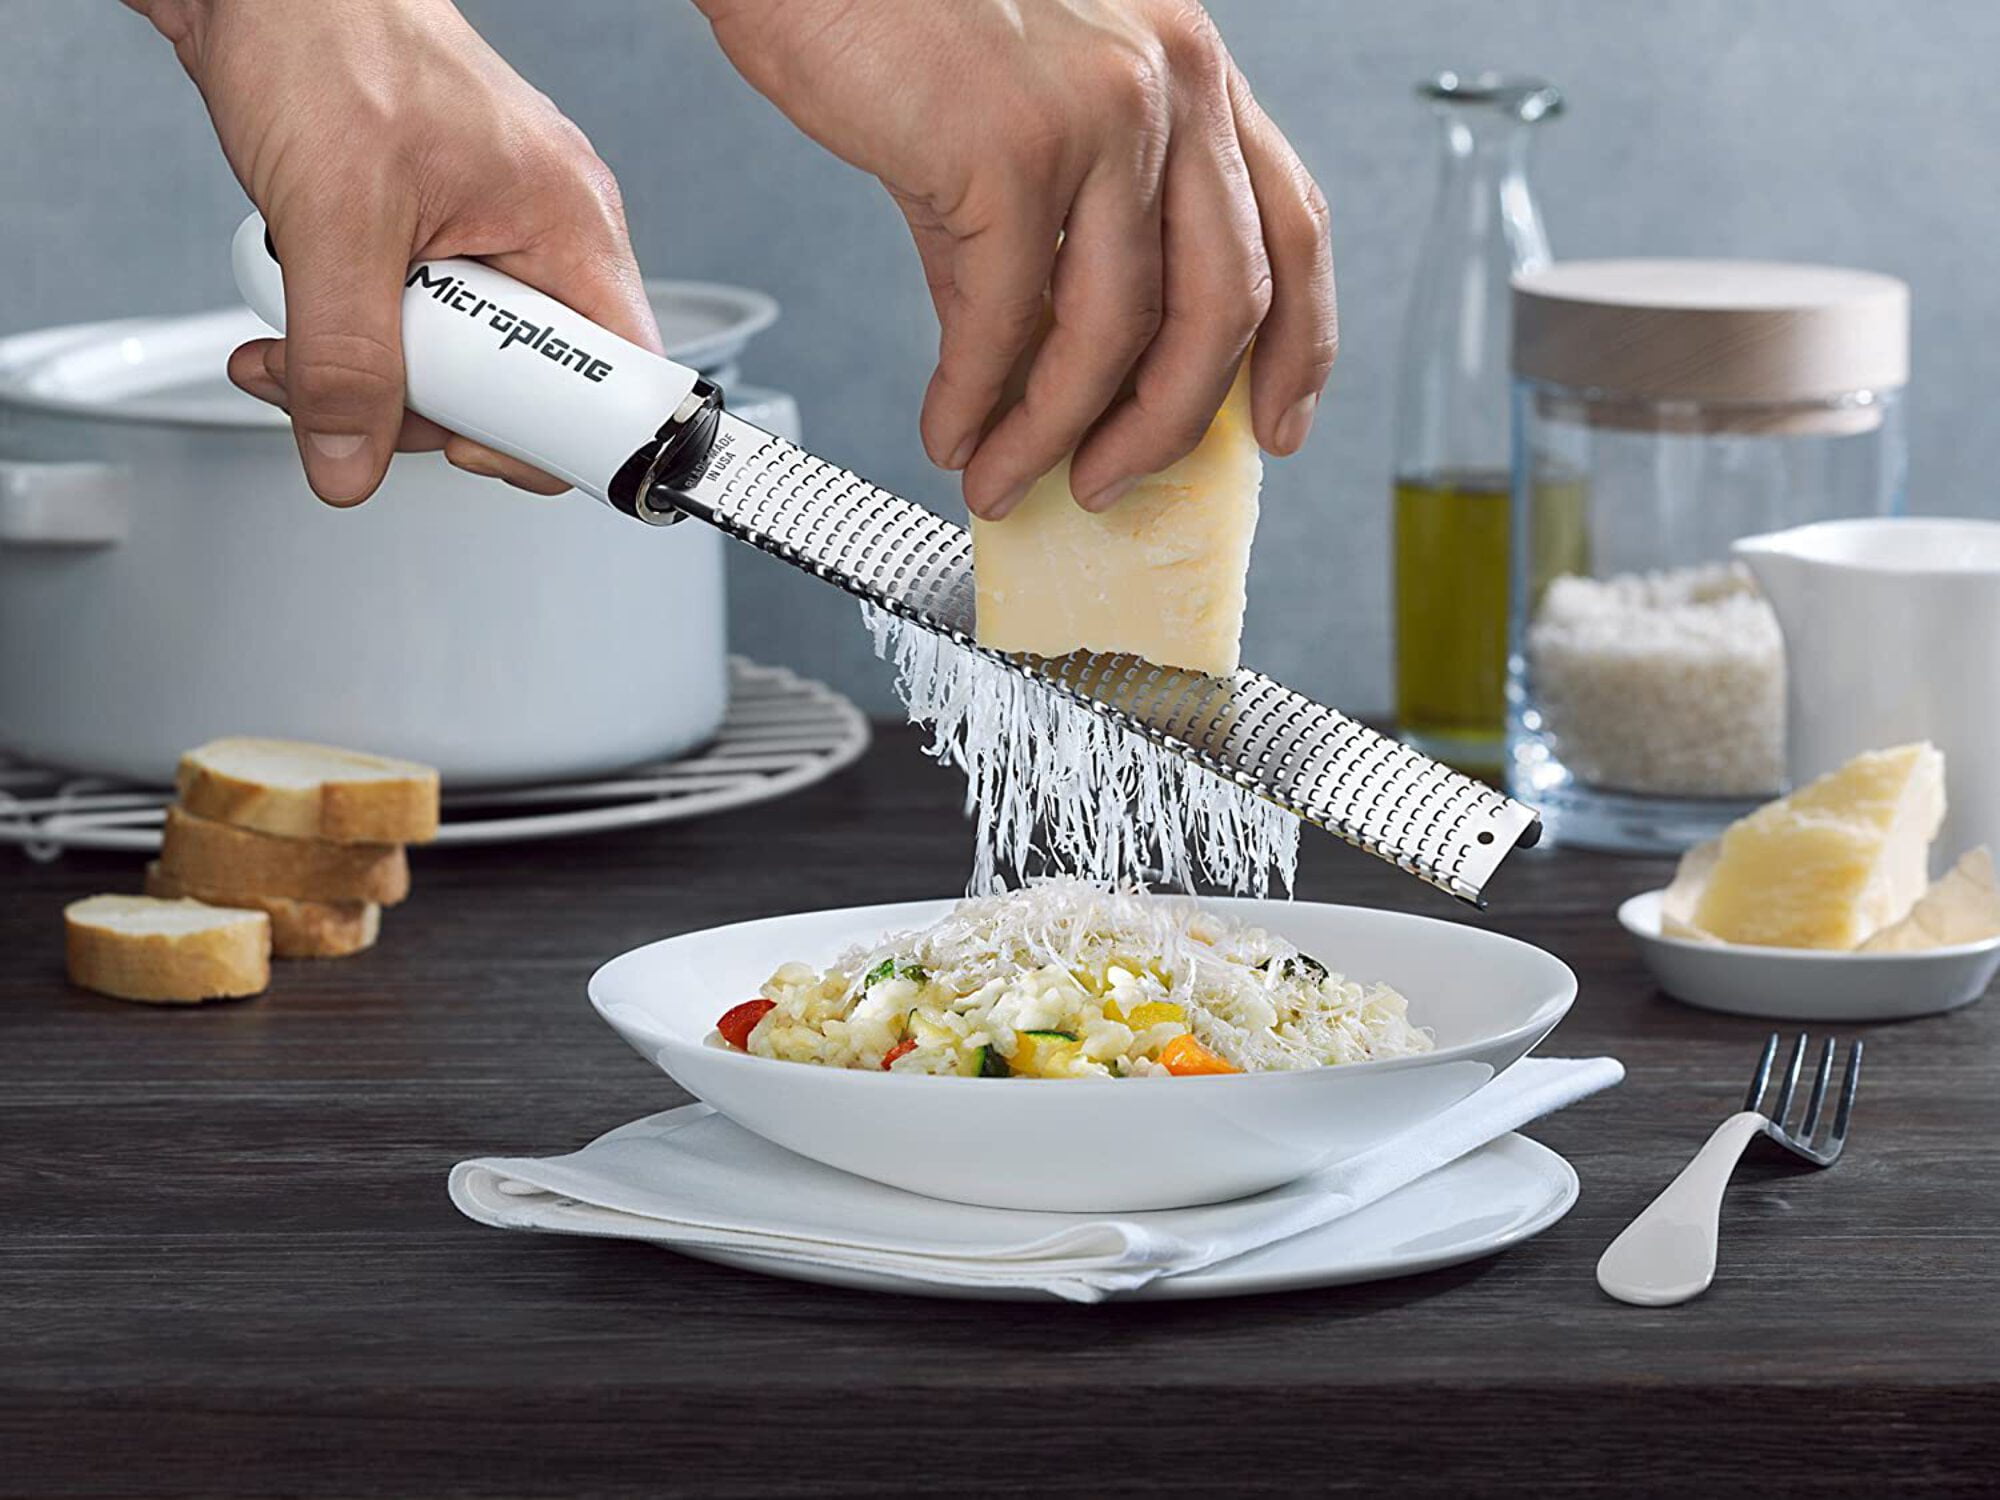 Microplane Select Extra Coarse Cheese Grater- Purist Blue | Hand Held Grater